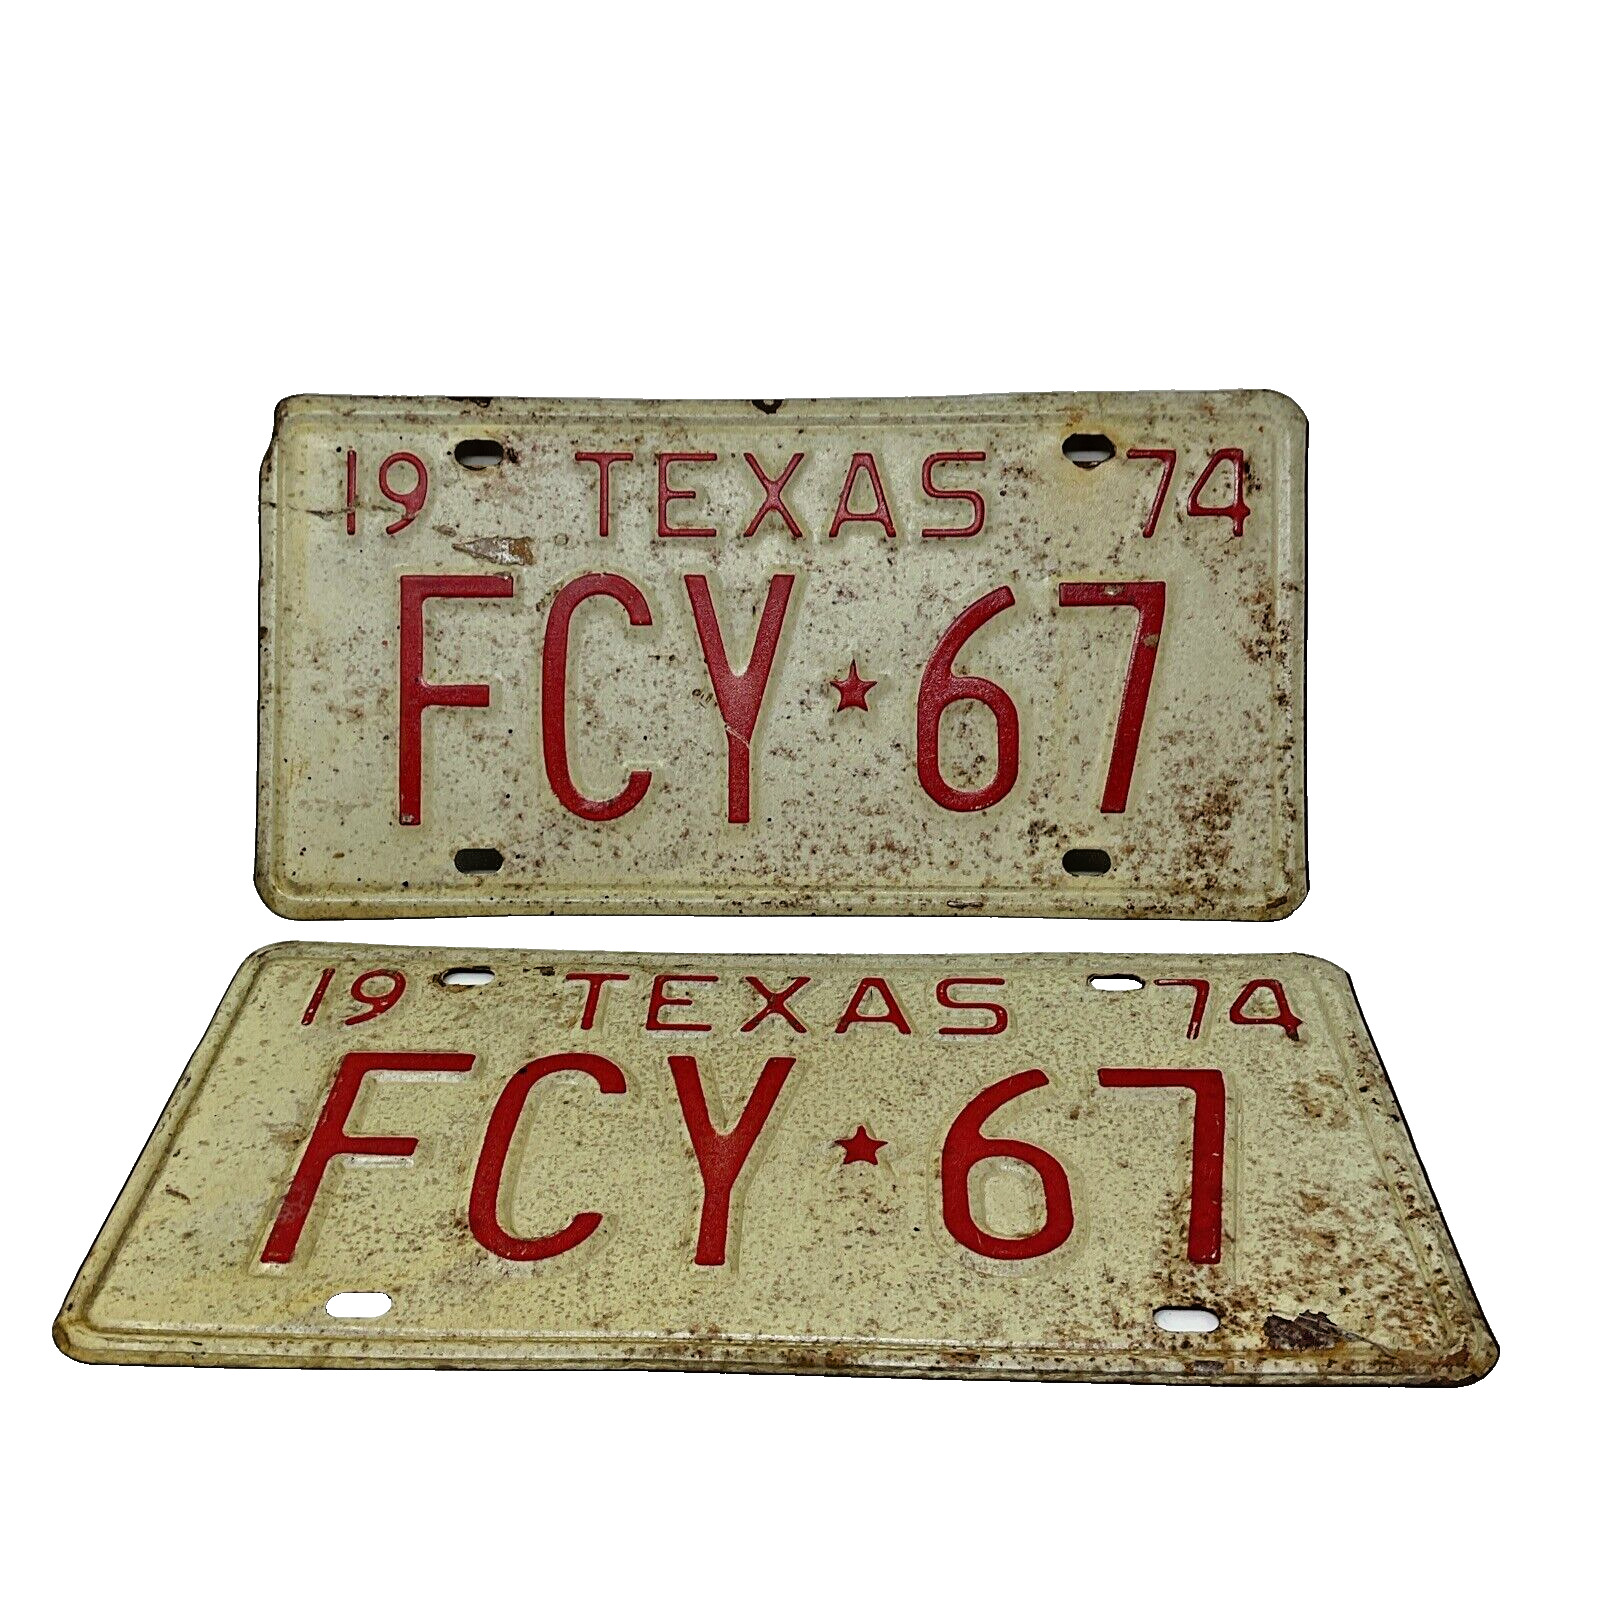 Vintage 1974 Texas License Plates Pair FCY 57 Red On White Vintage